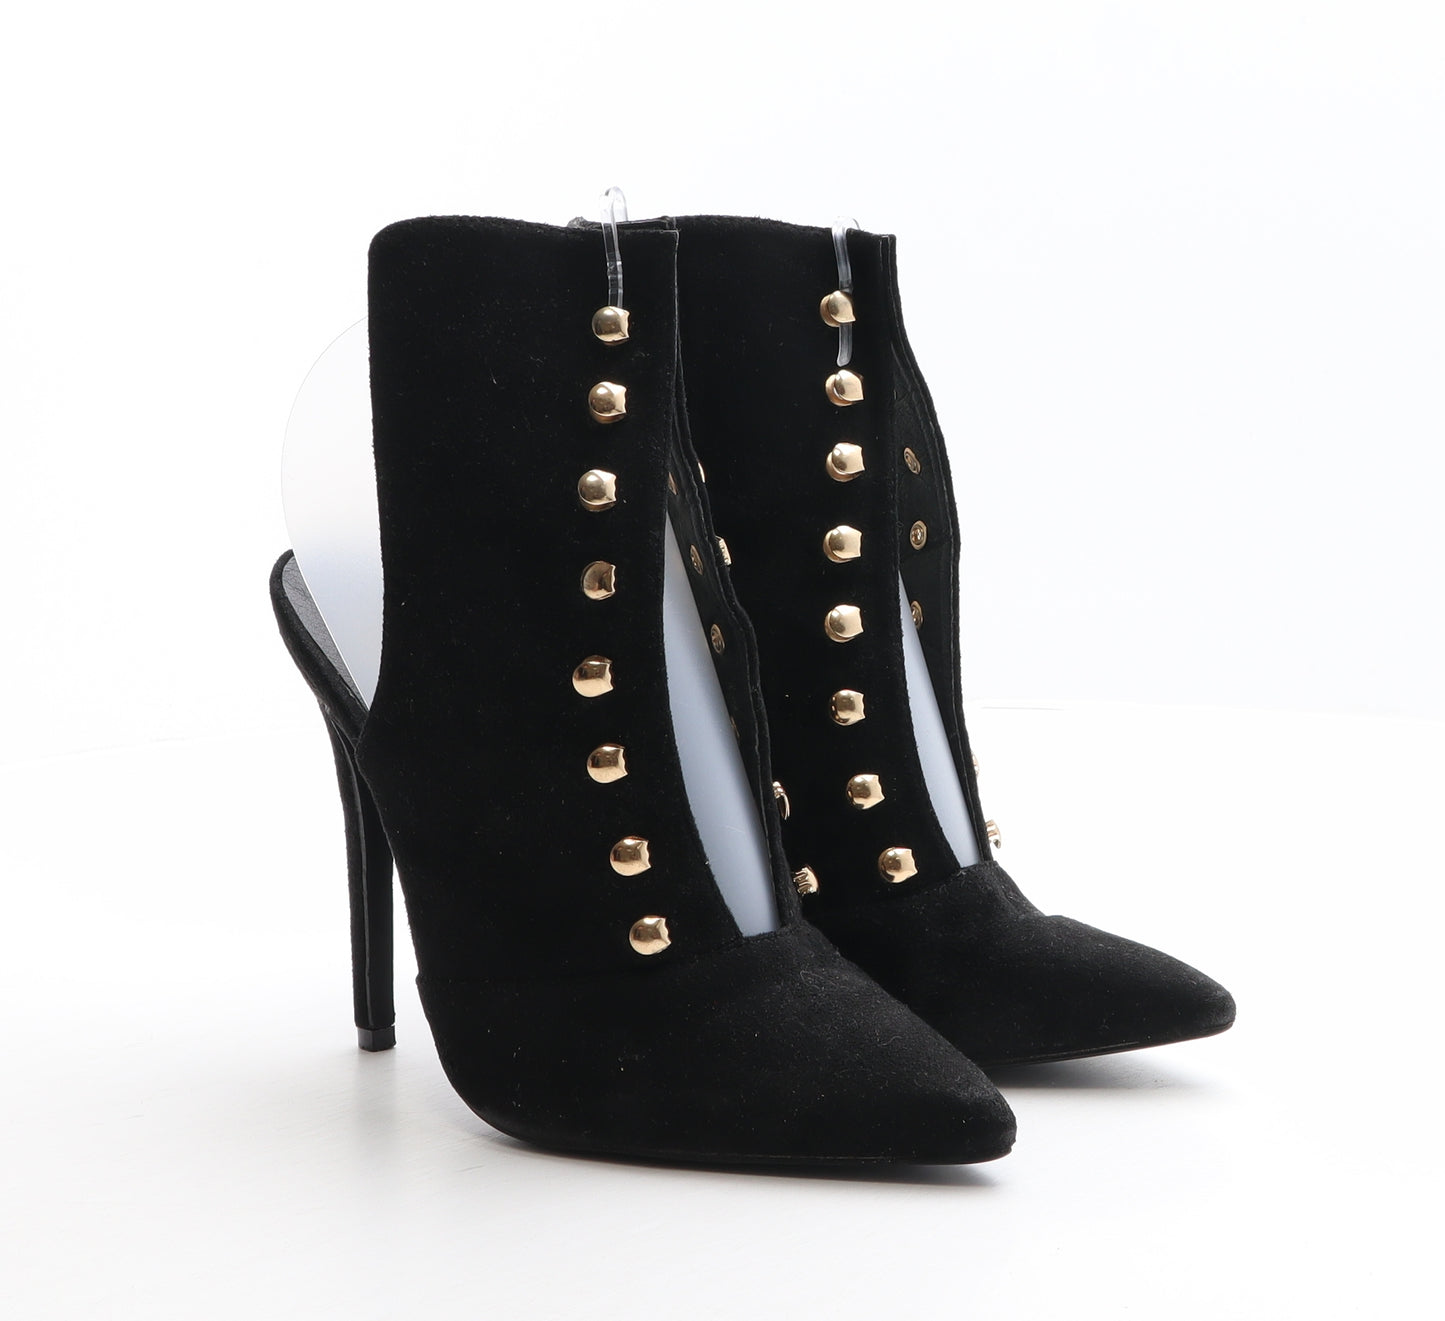 Missguided Womens Black Polyester Bootie Boot UK 6 - Cut out